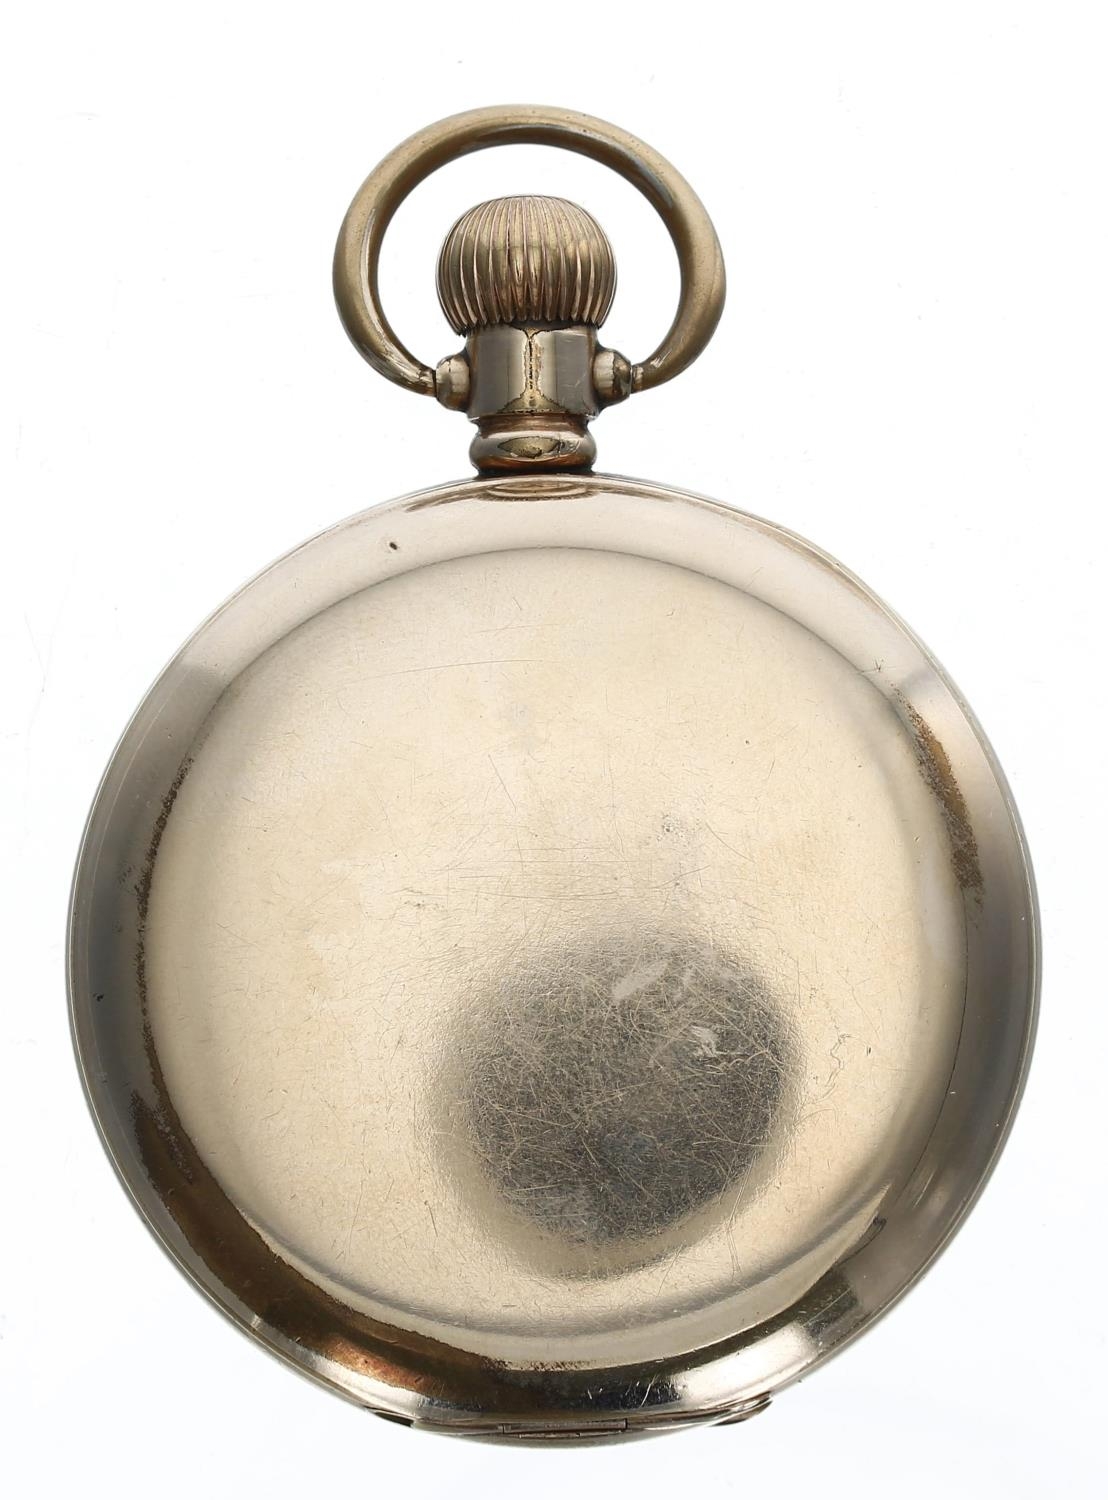 American Waltham 'Riverside Maximus' gold plated lever pocket watch, circa 1902, serial no. - Image 4 of 4